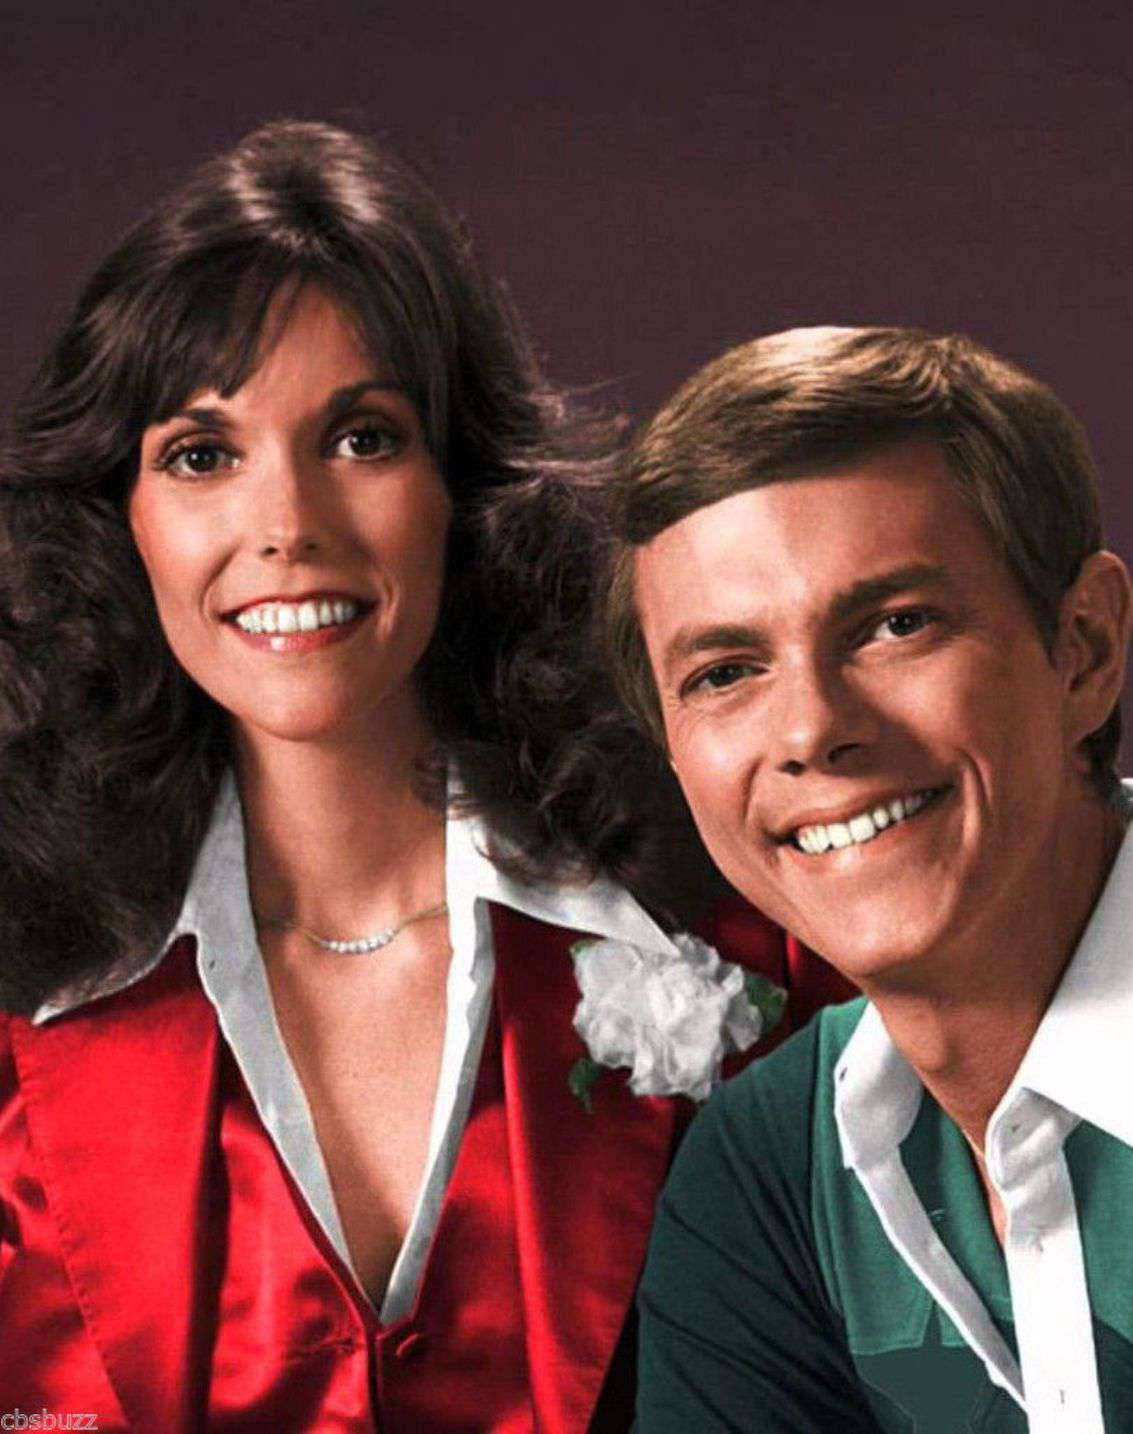 Legendary Musical Duo 'The Carpenters' performing on stage in 1977 Wallpaper